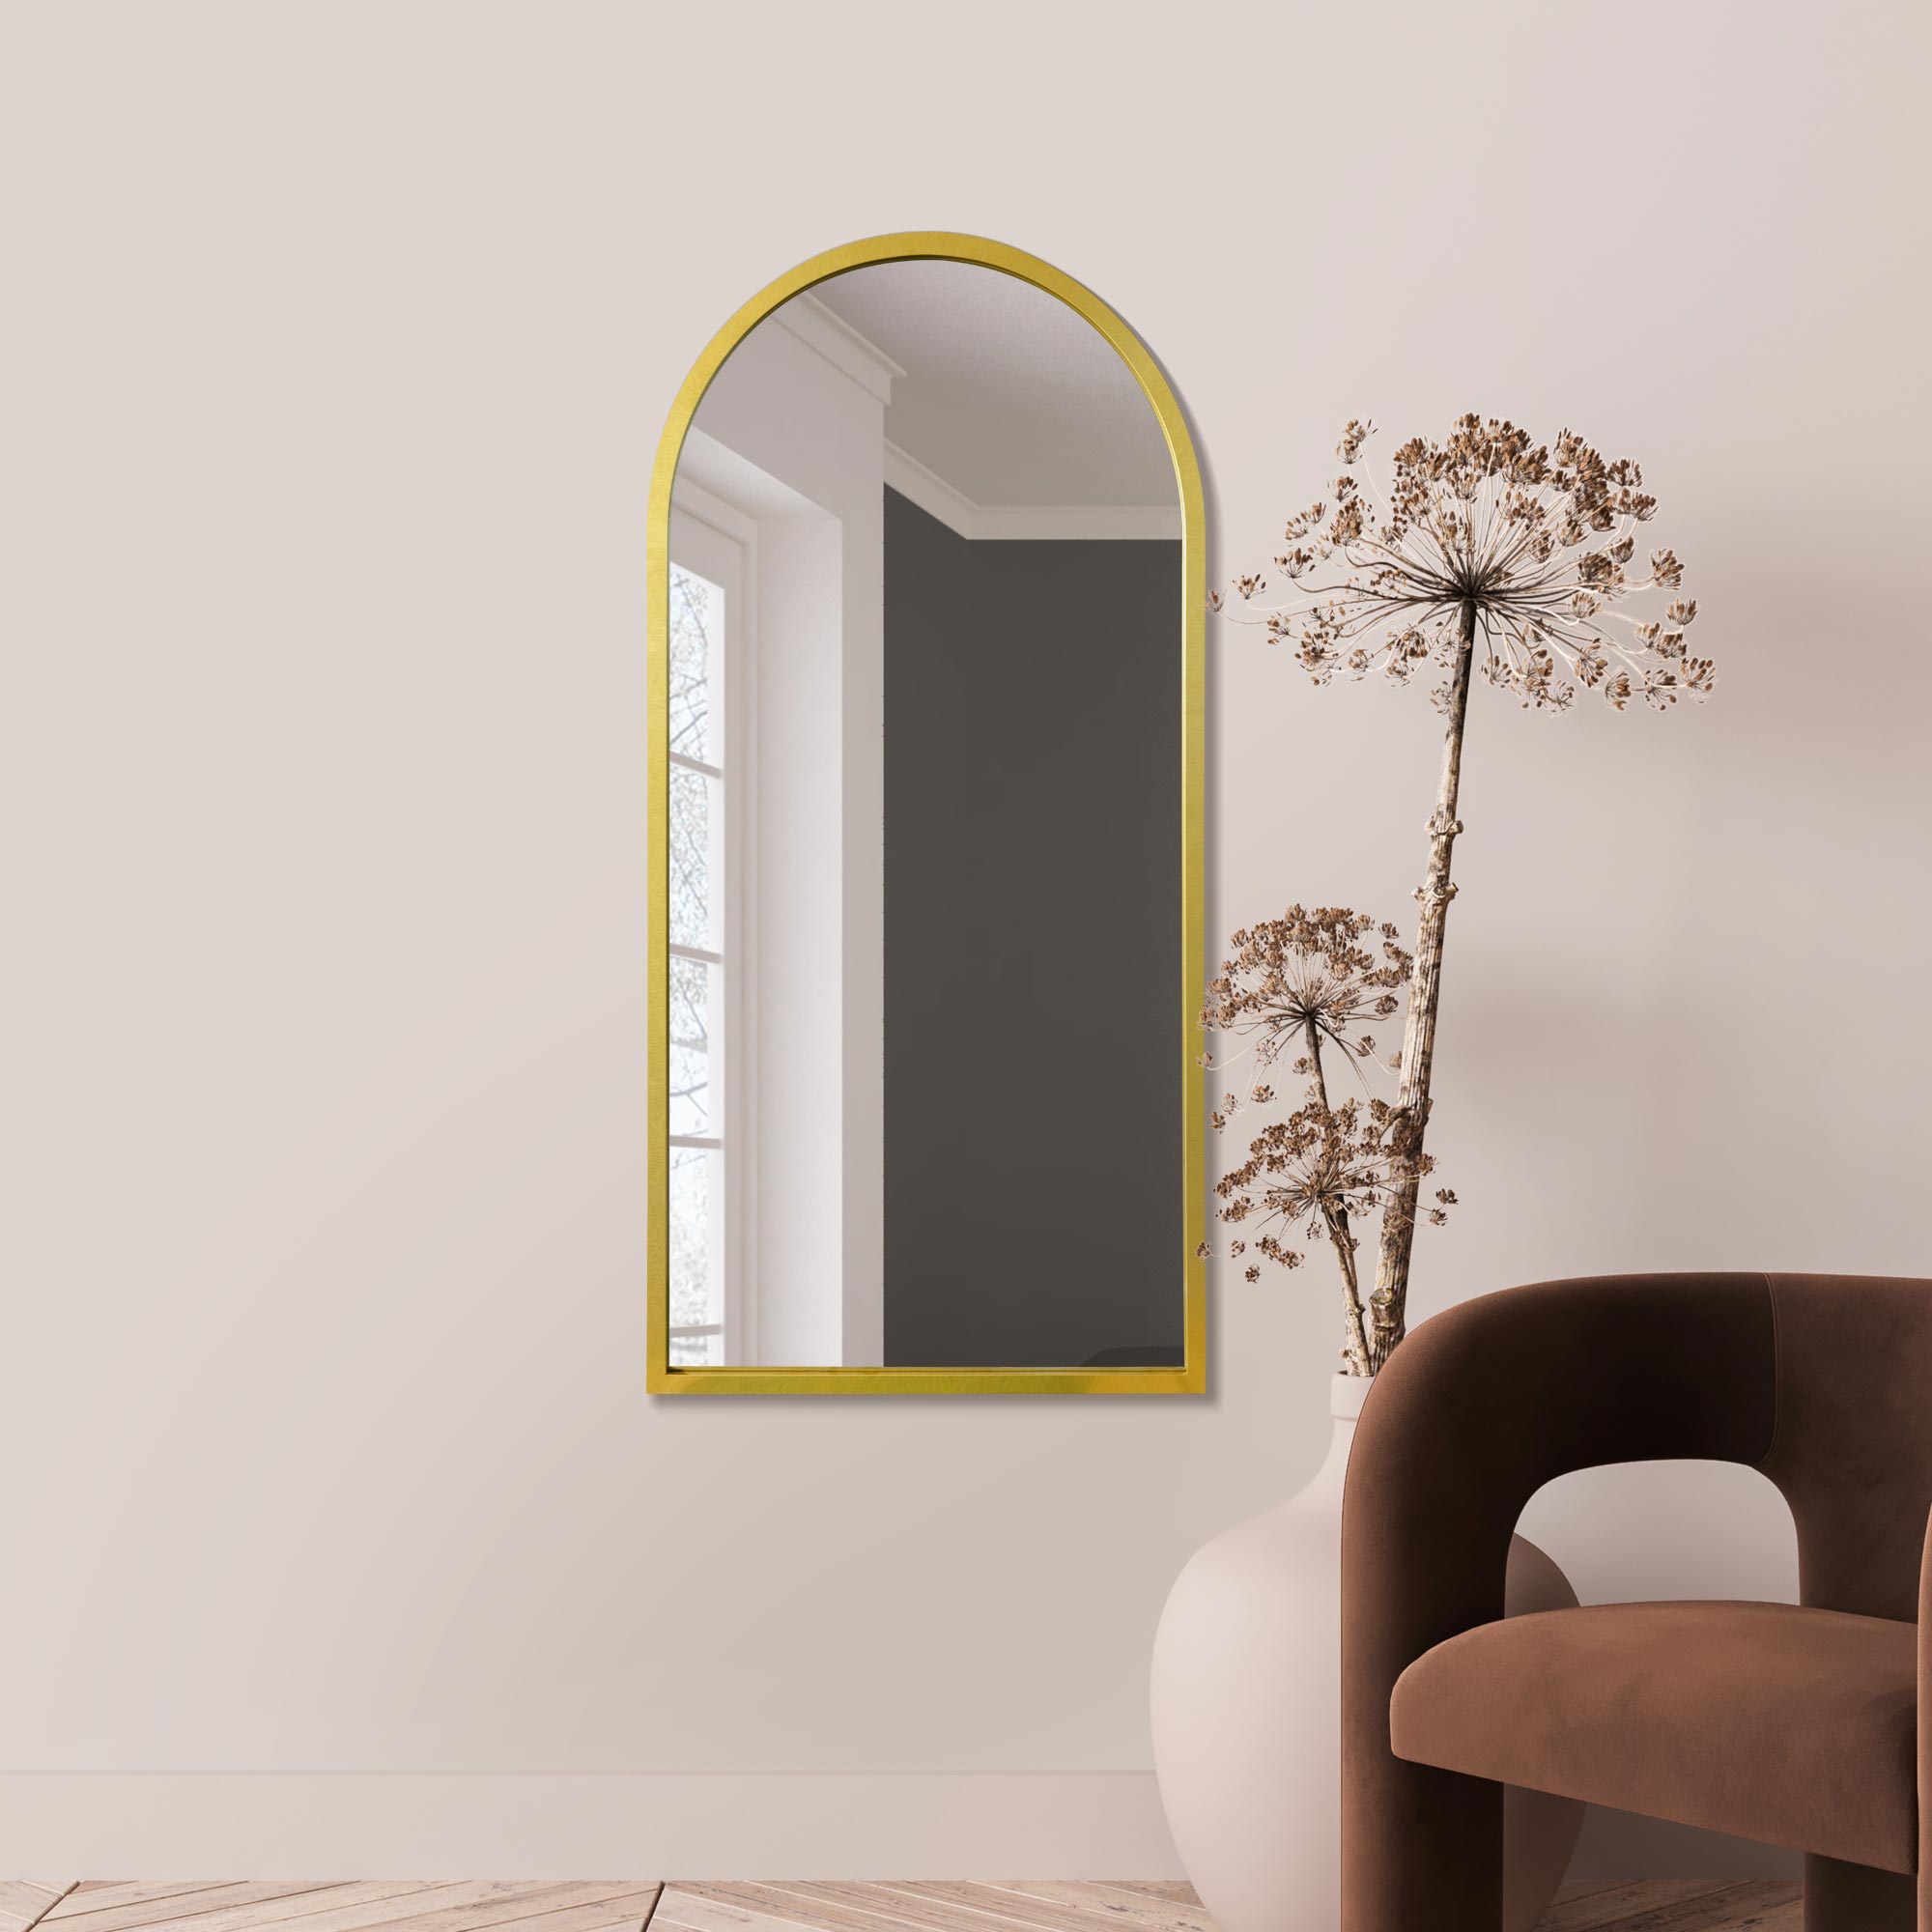 Arcus Framed Arched Wall Mirror